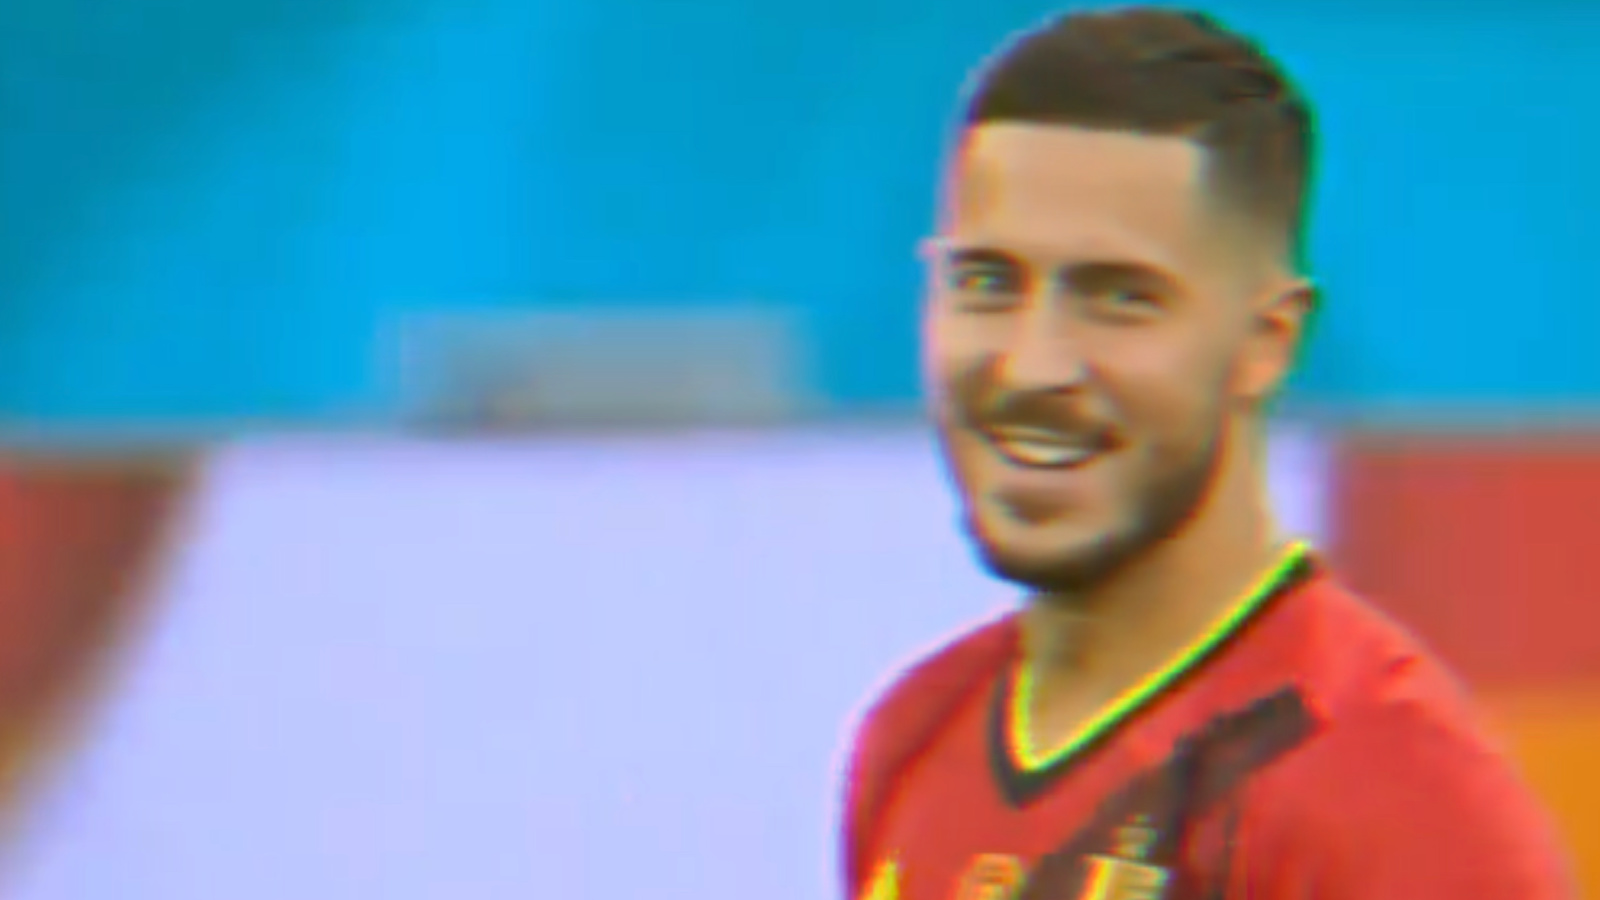 Eden Hazard’s personal highlights against Portugal makes for a compelling watch